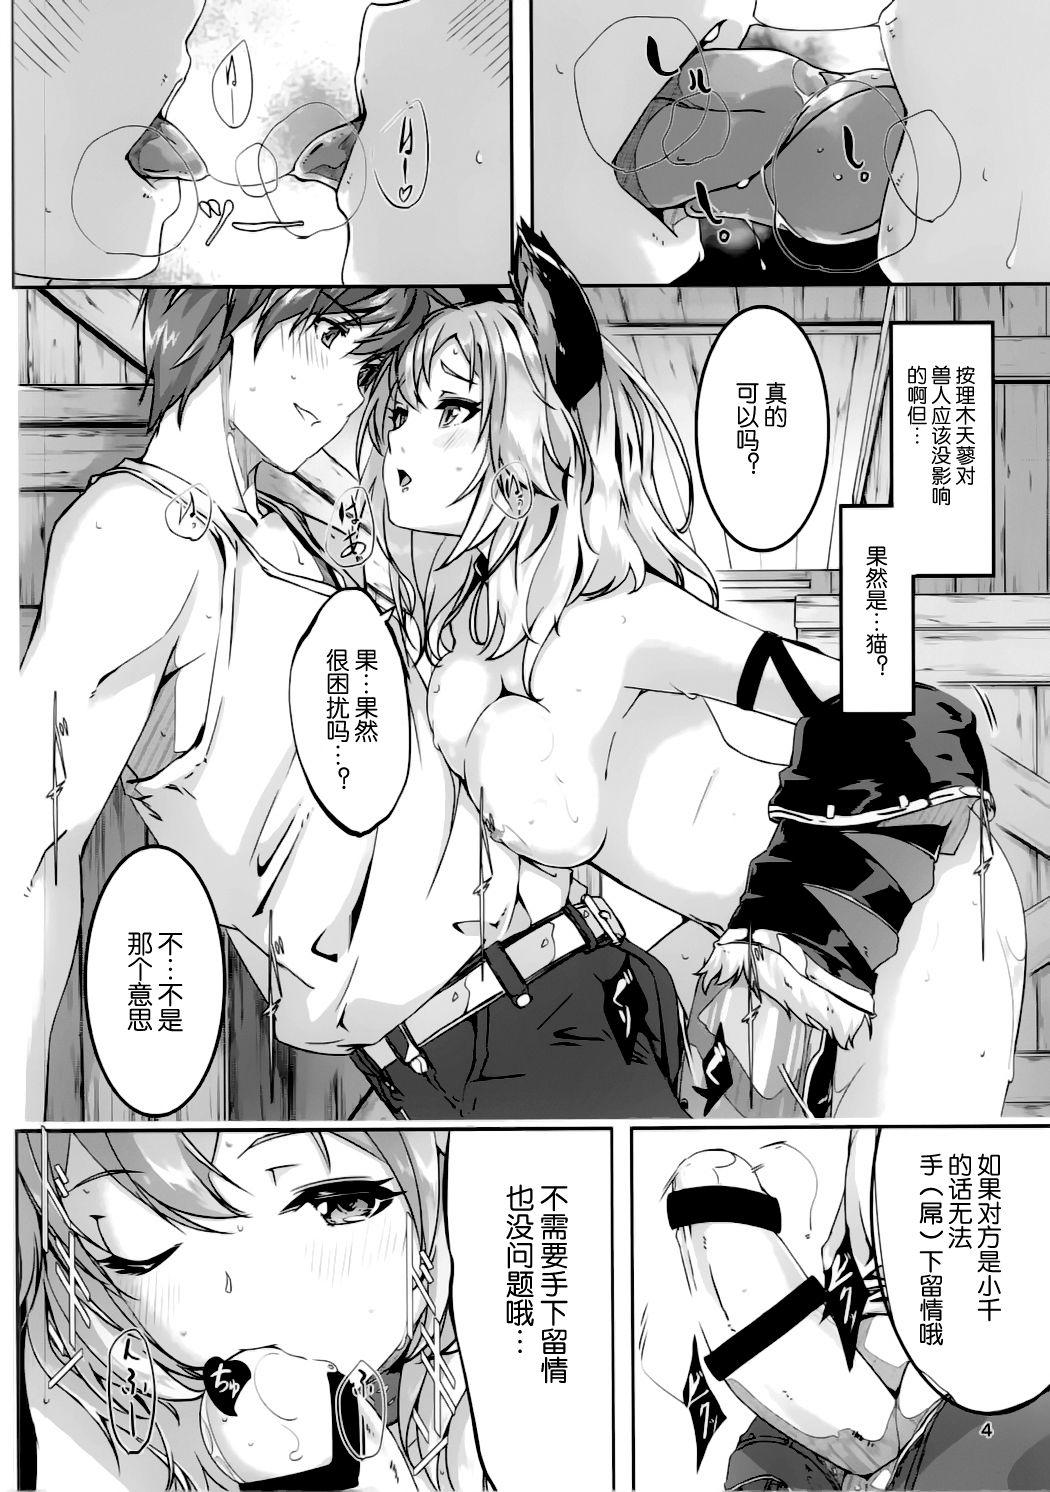 Submission Sen-chan to Issho - Granblue fantasy Hard - Page 5